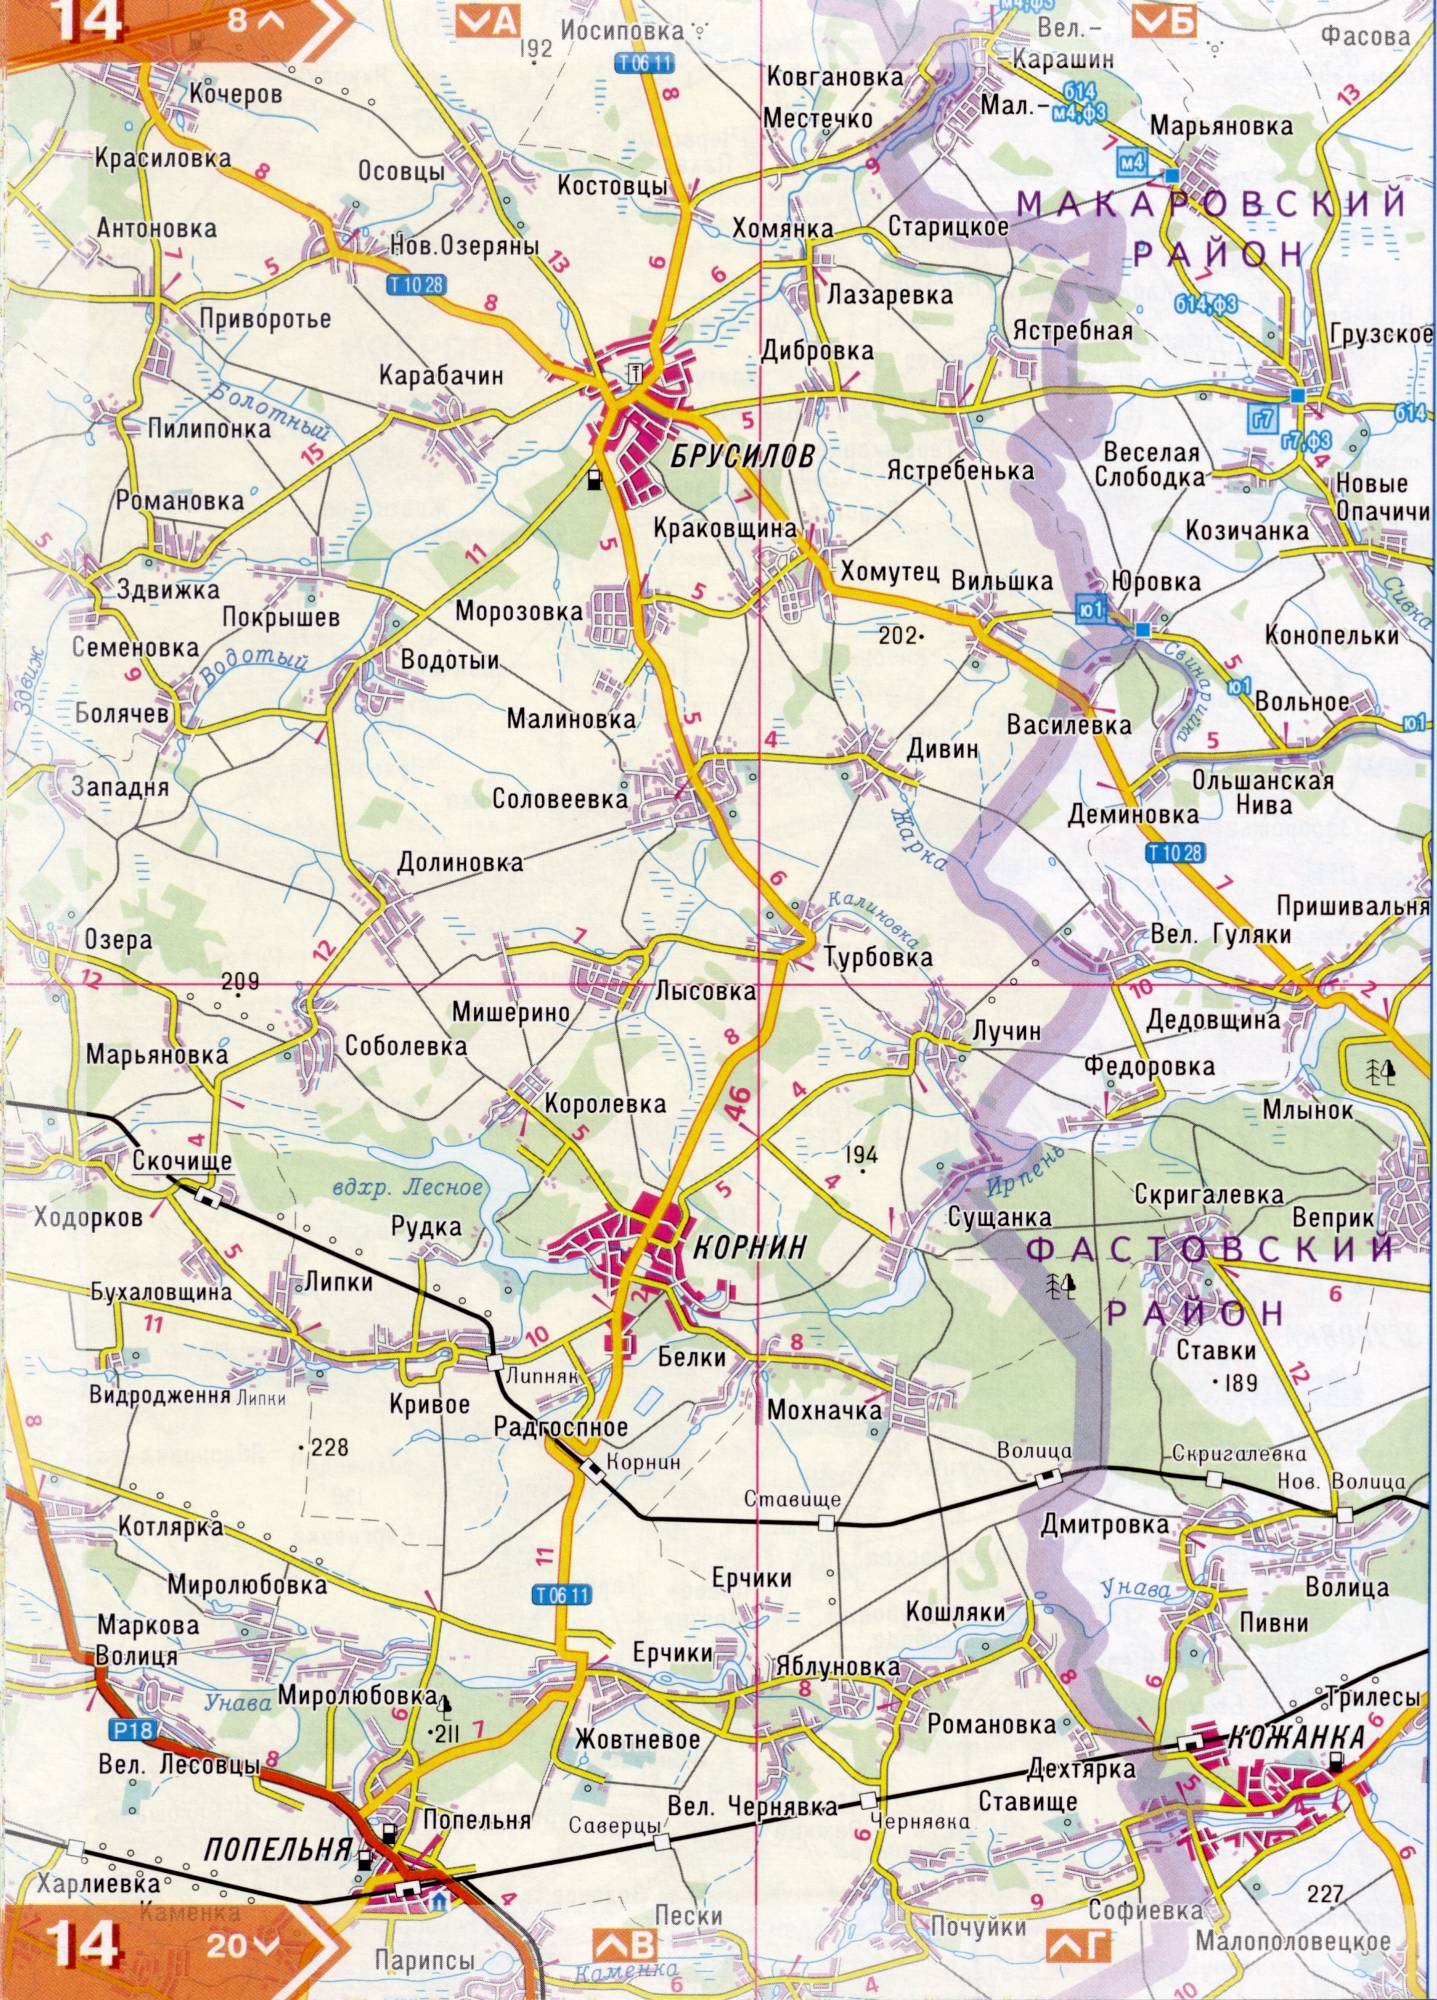 Atlas of the Kiev region. Detailed map of the Kiev region from the road atlas. Kiev region on a detailed map of scale 1cm = 3km. Free Download, A3